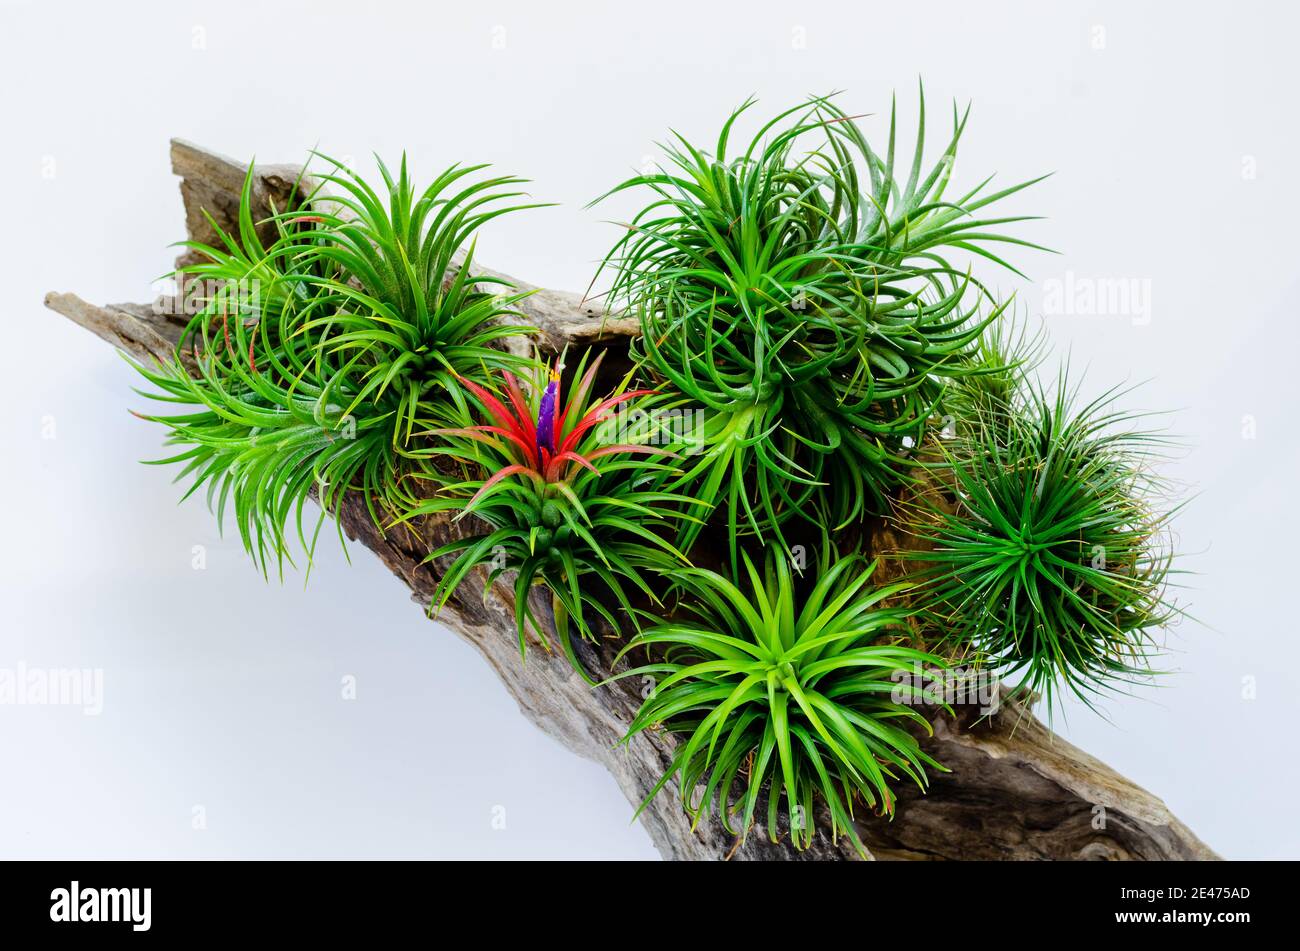 Air plant - Tillandsia with its flower plants in wooden log on white background. Stock Photo